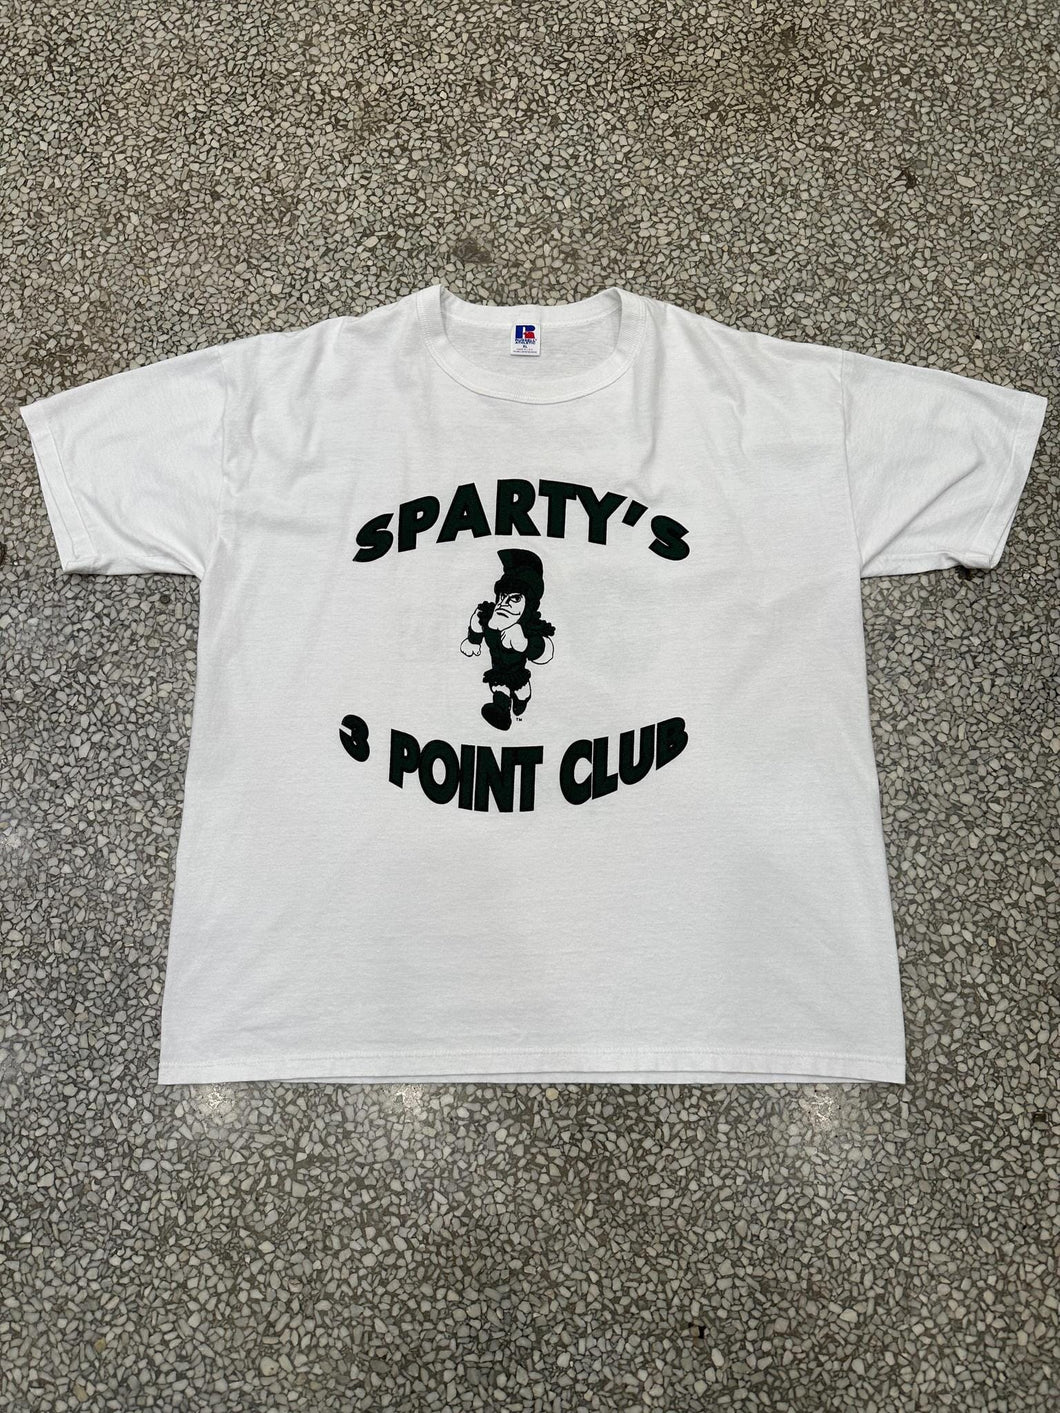 Michigan State Vintage 90s Sparty's 3 Point Club Russell Tee White ABC Vintage 